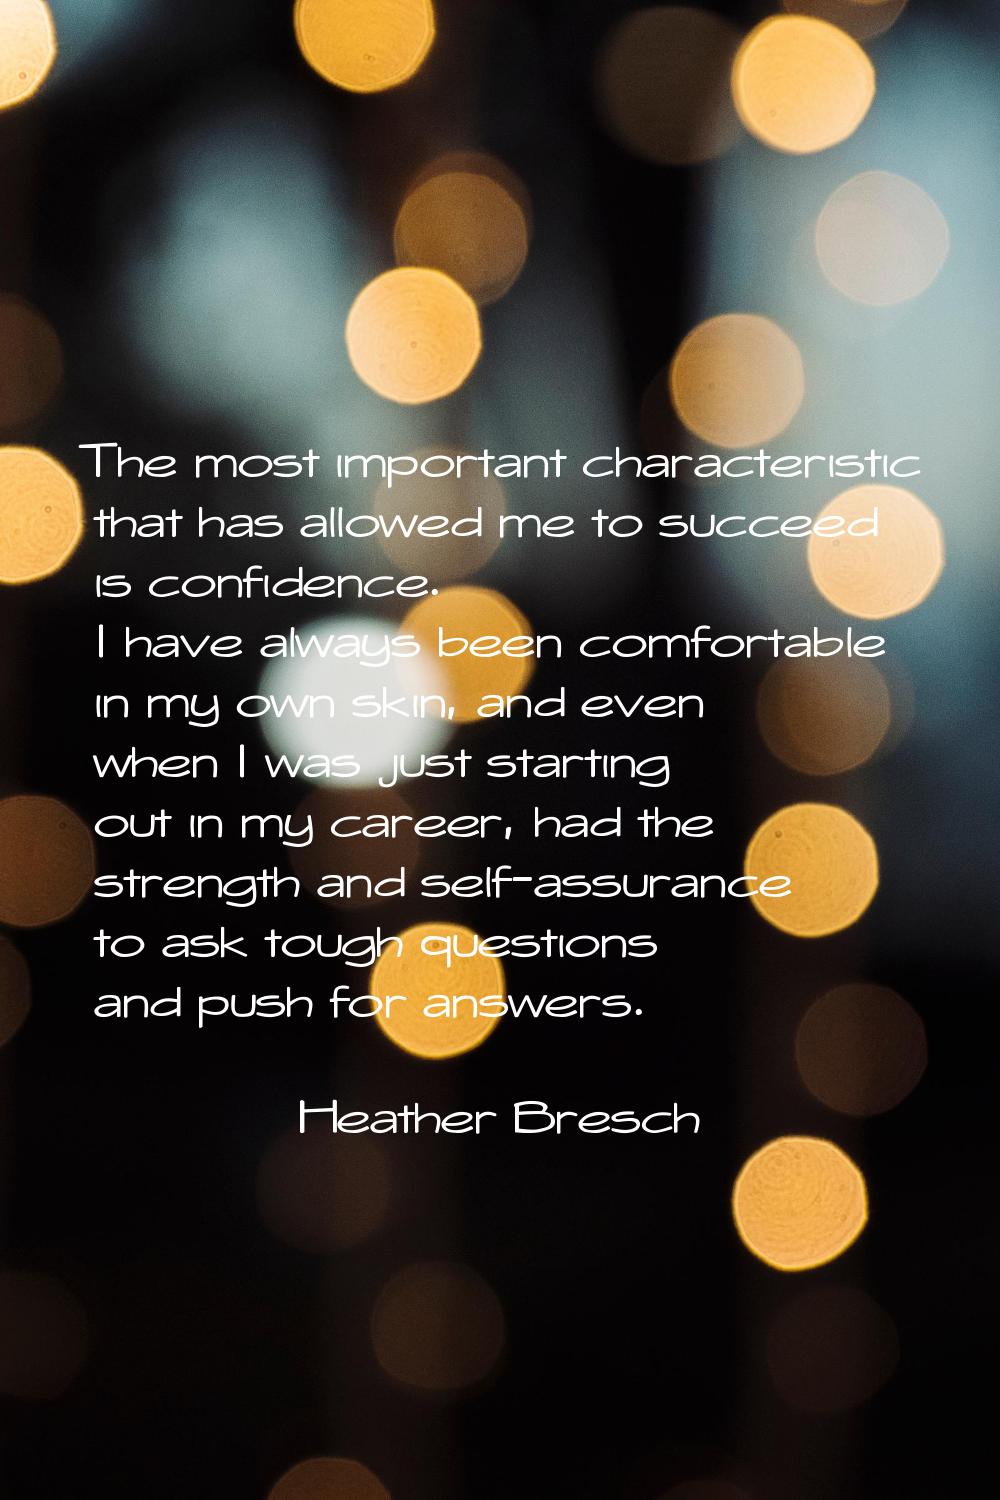 The most important characteristic that has allowed me to succeed is confidence. I have always been 